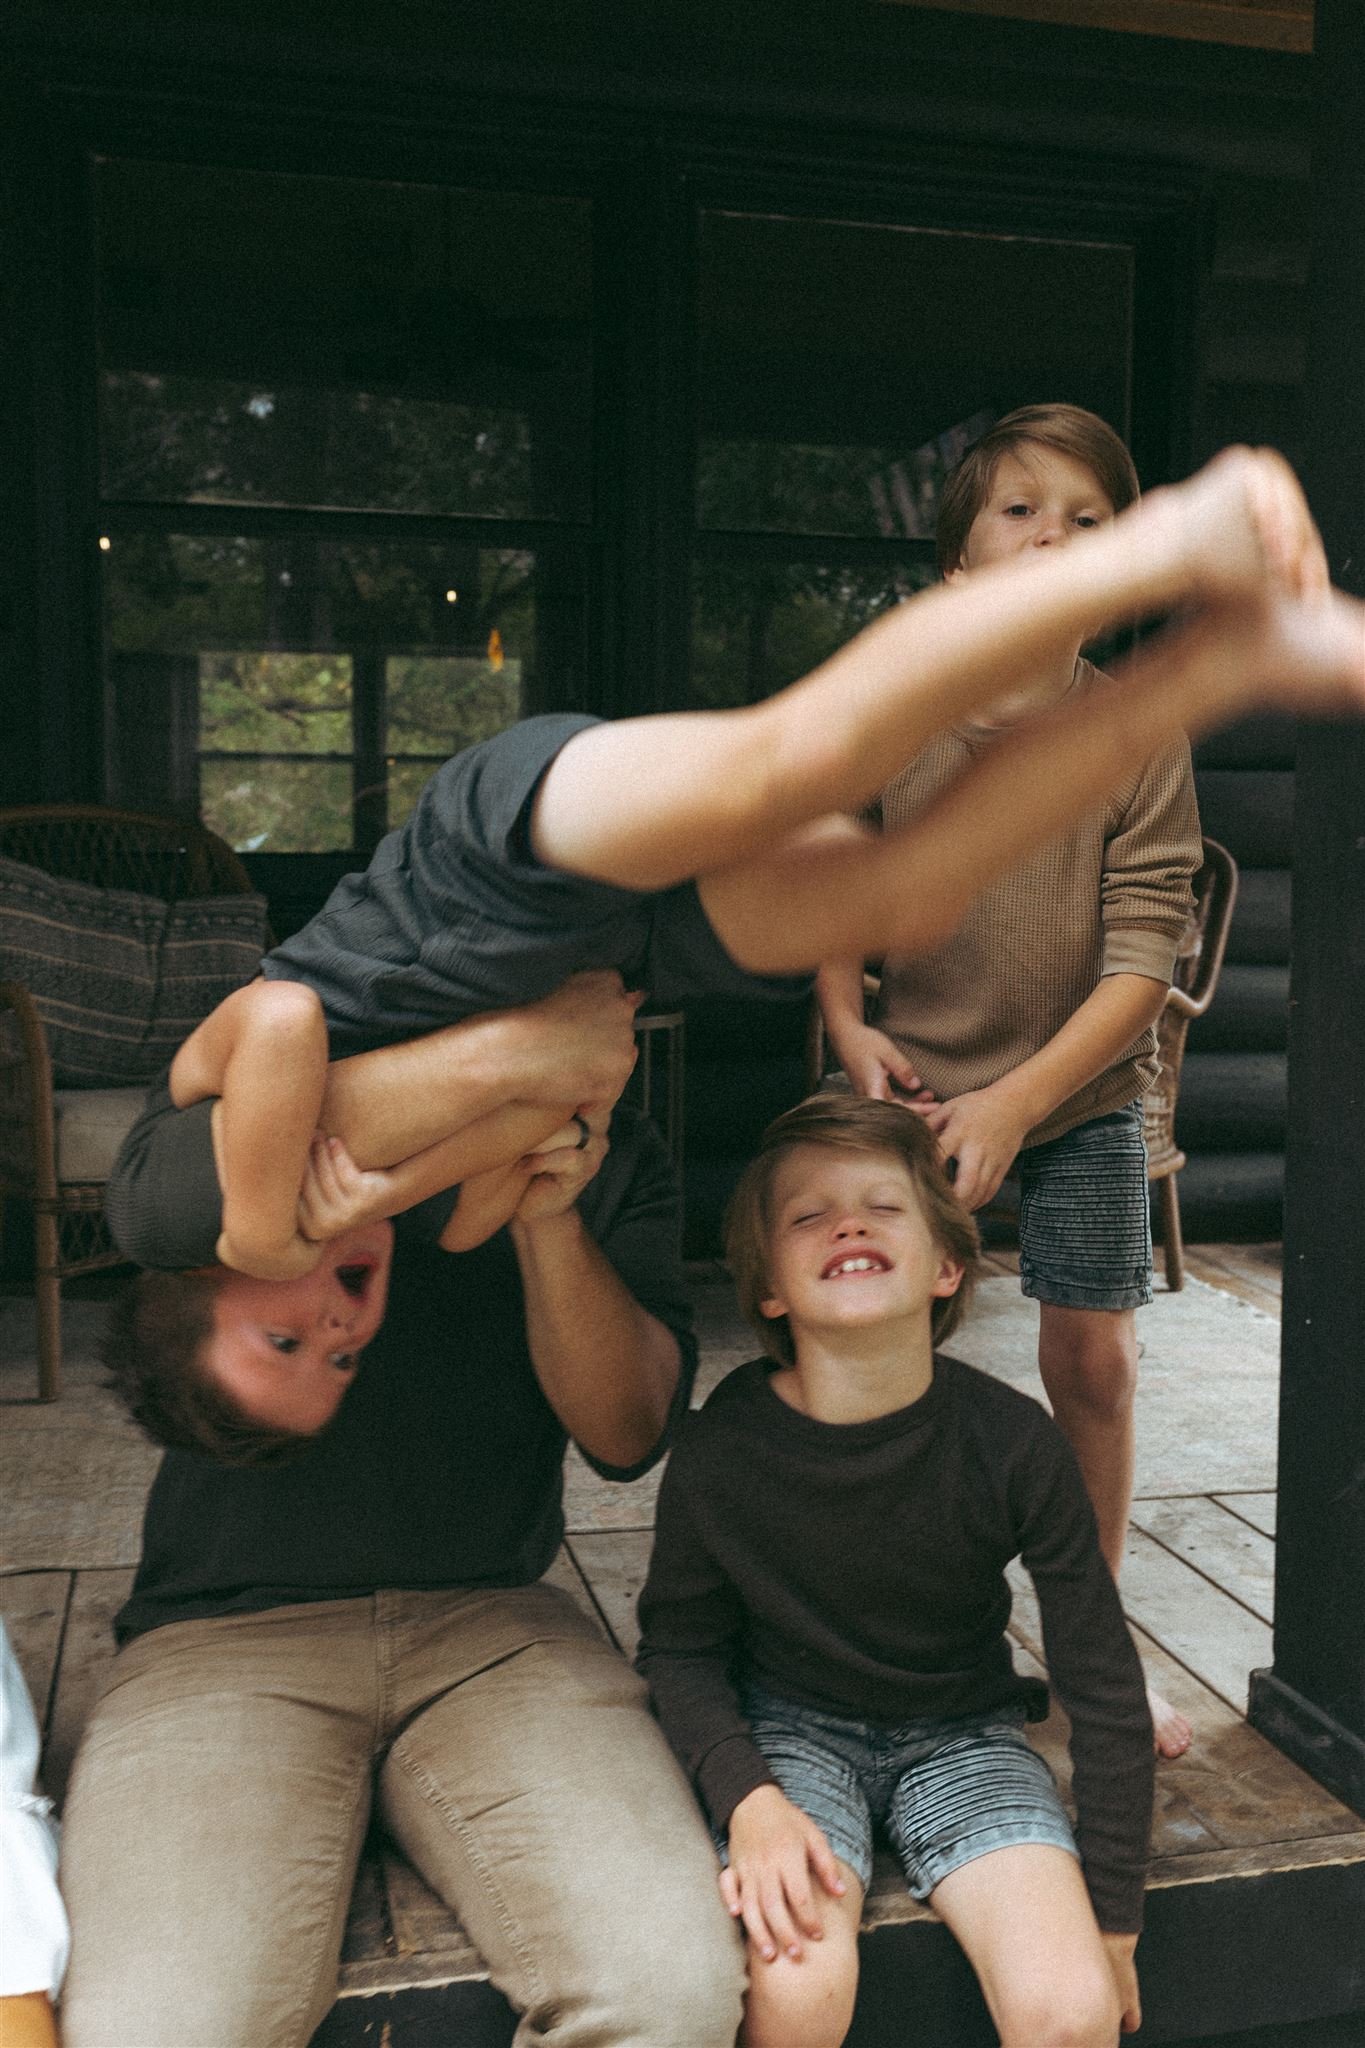  Boys being silly in front of the camera in Allen, Texas during a family photography session 